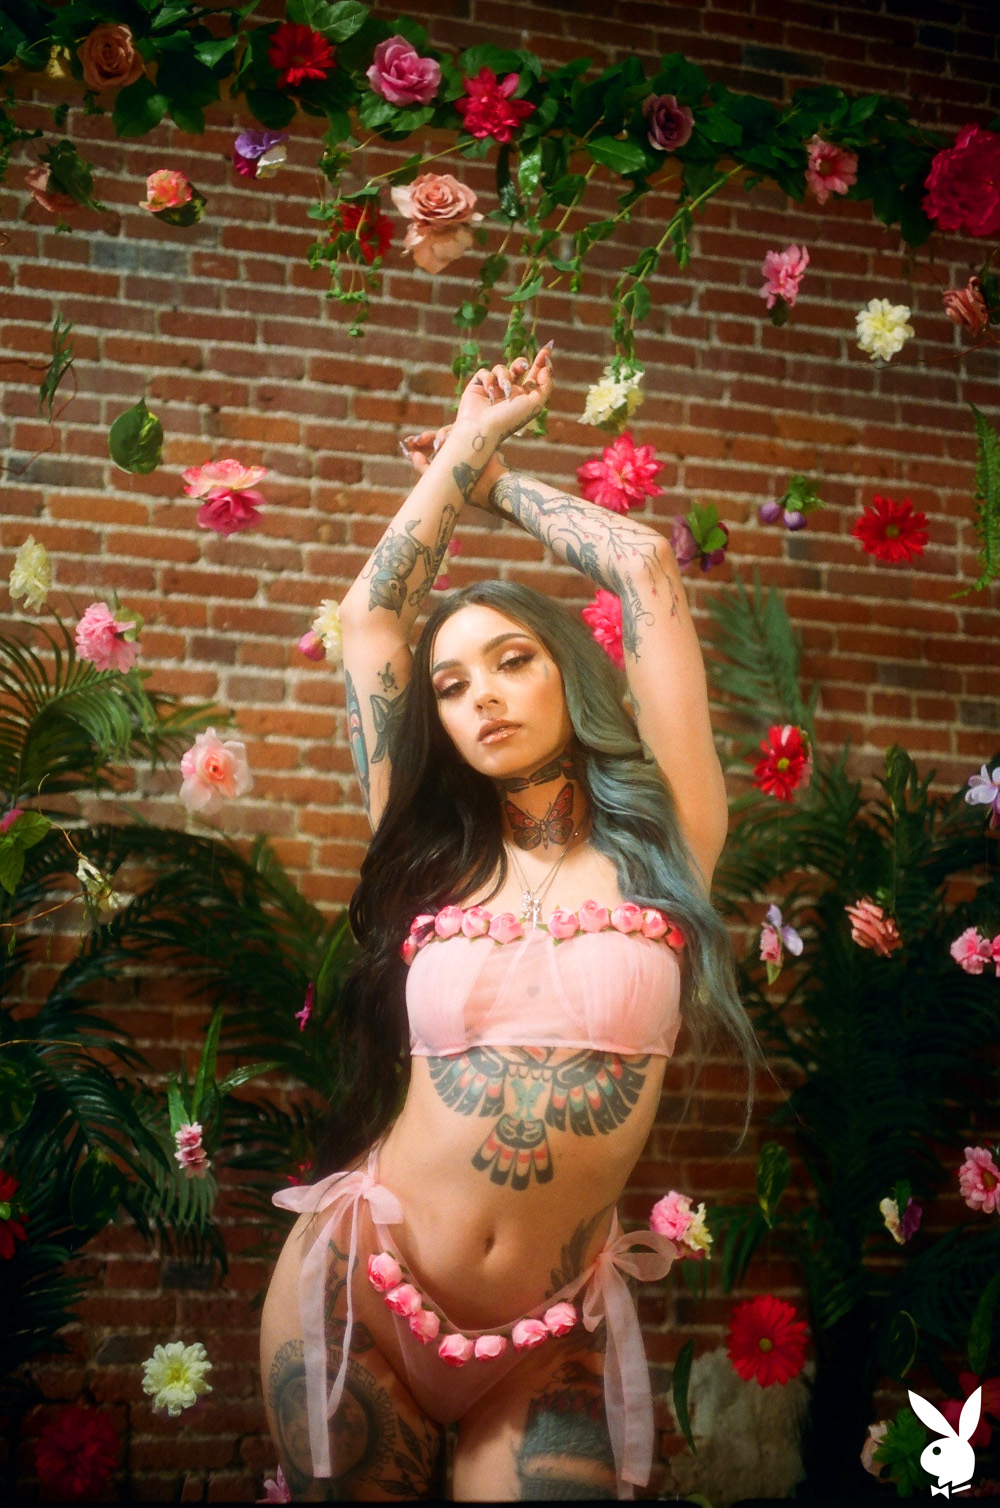 Taylor White exposes her inked body in front of a wall of flowers